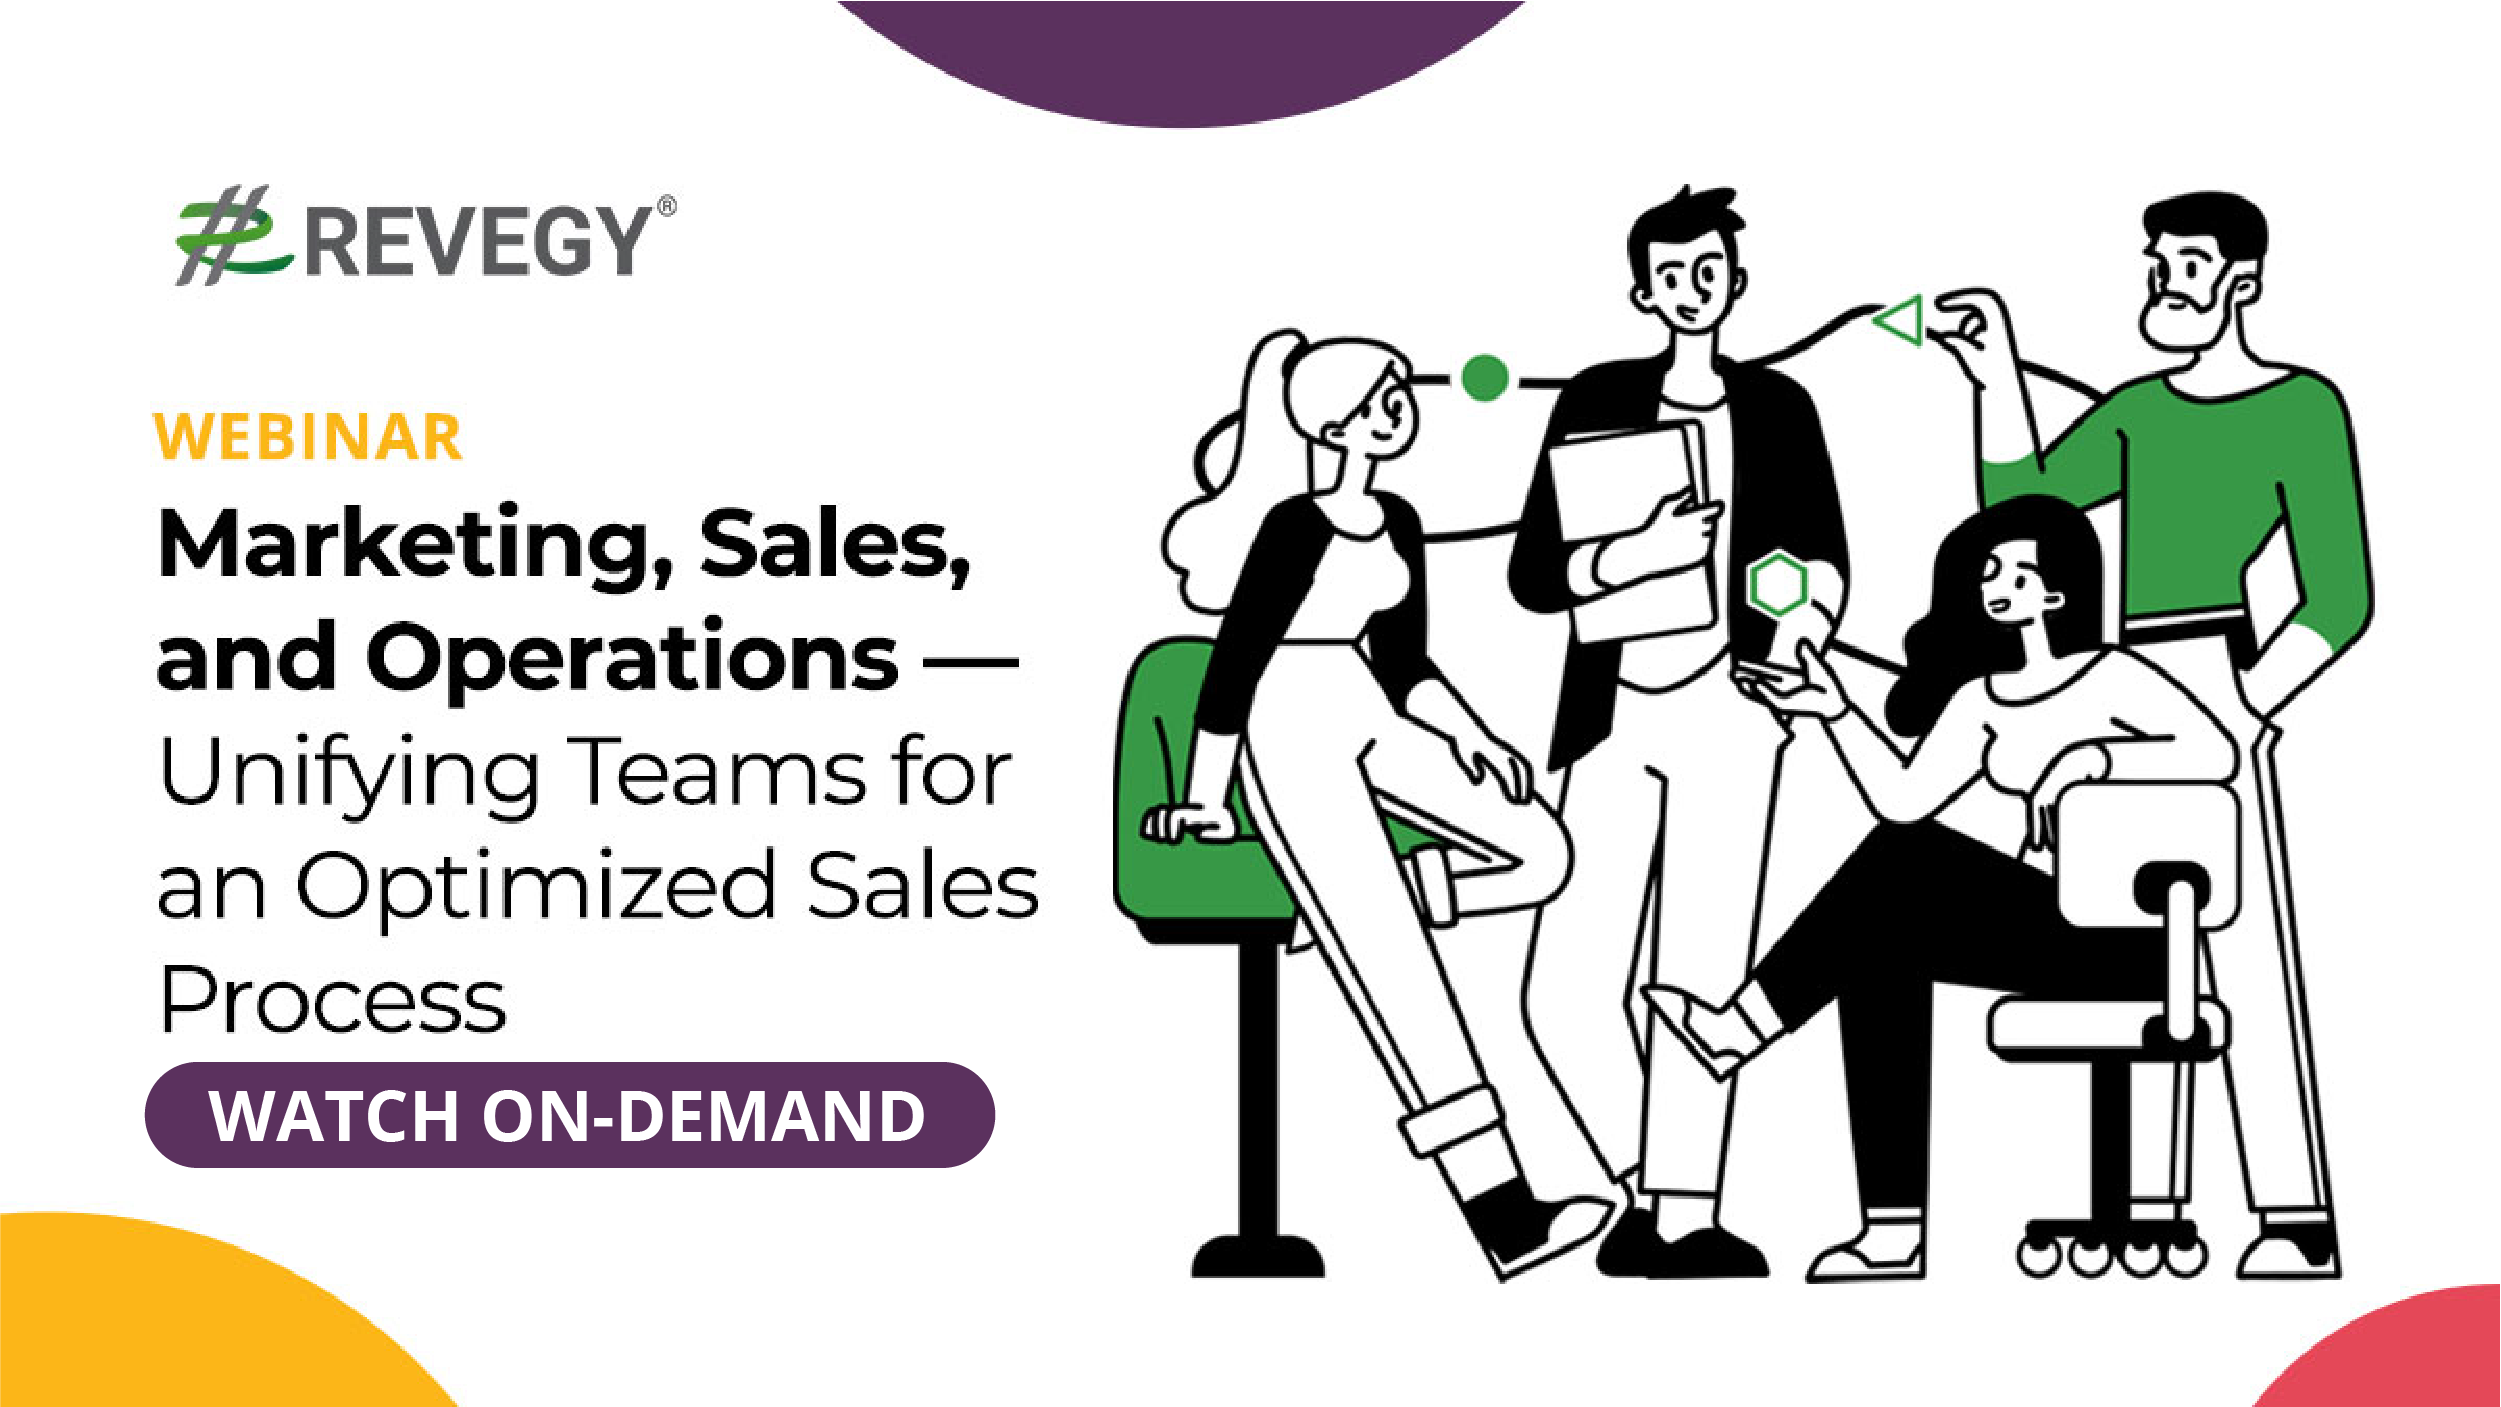 Marketing, Sales, and Operations - Unifying Teams for an Optimized Sales Process